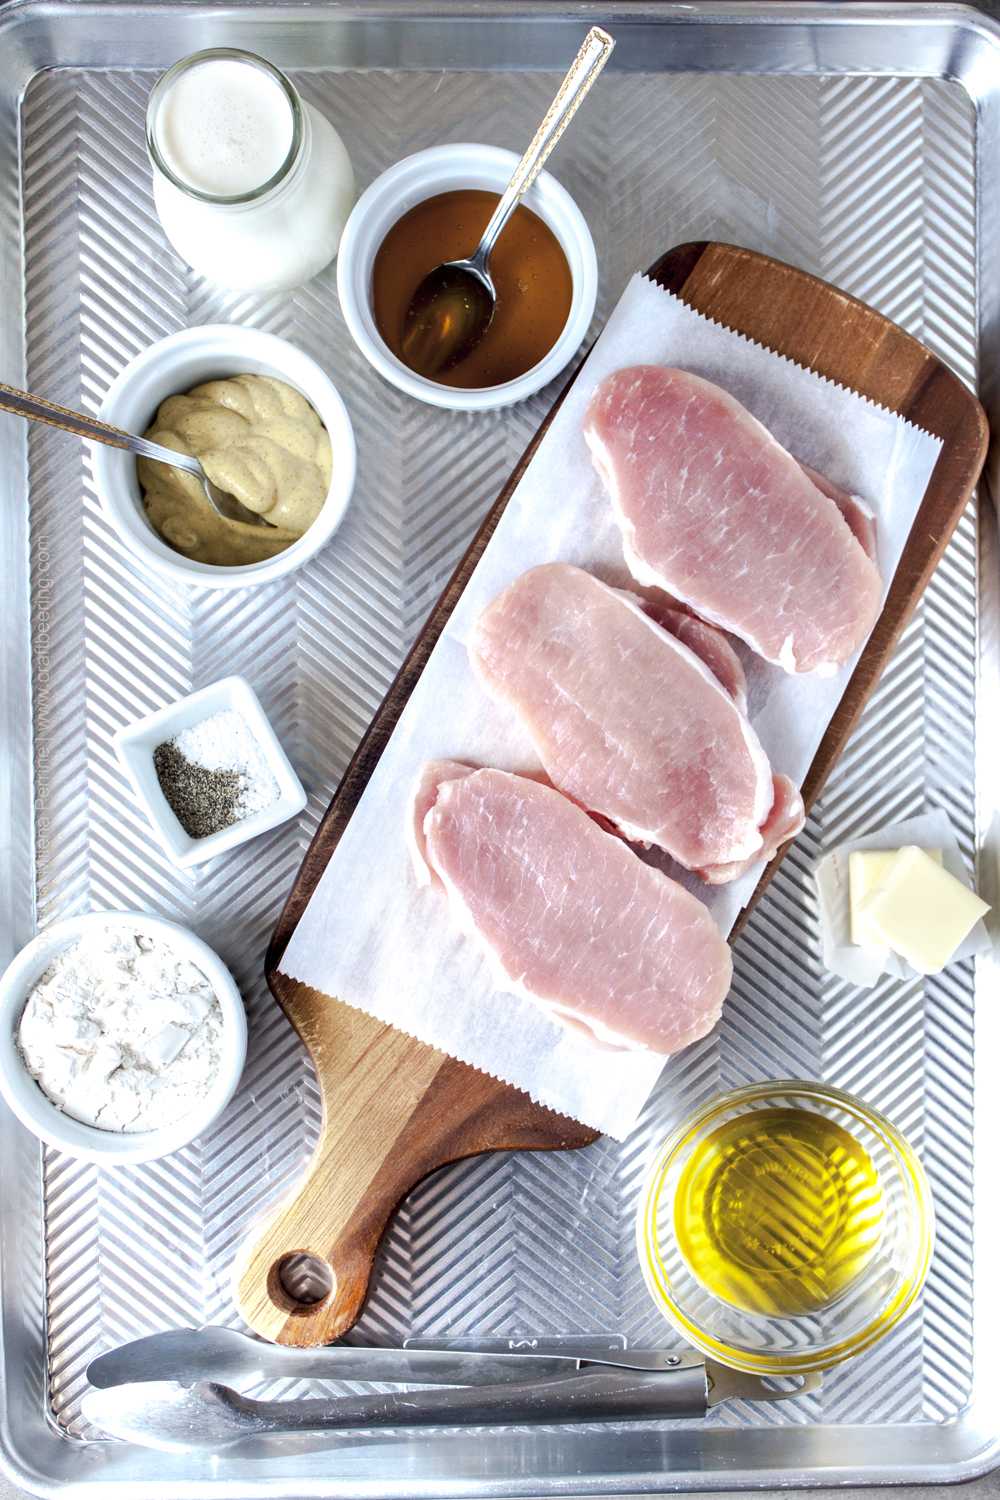 Raw boneless thin pork chops with other ingredients needed for pan searing them and making a creamy honey mustard pan sauce